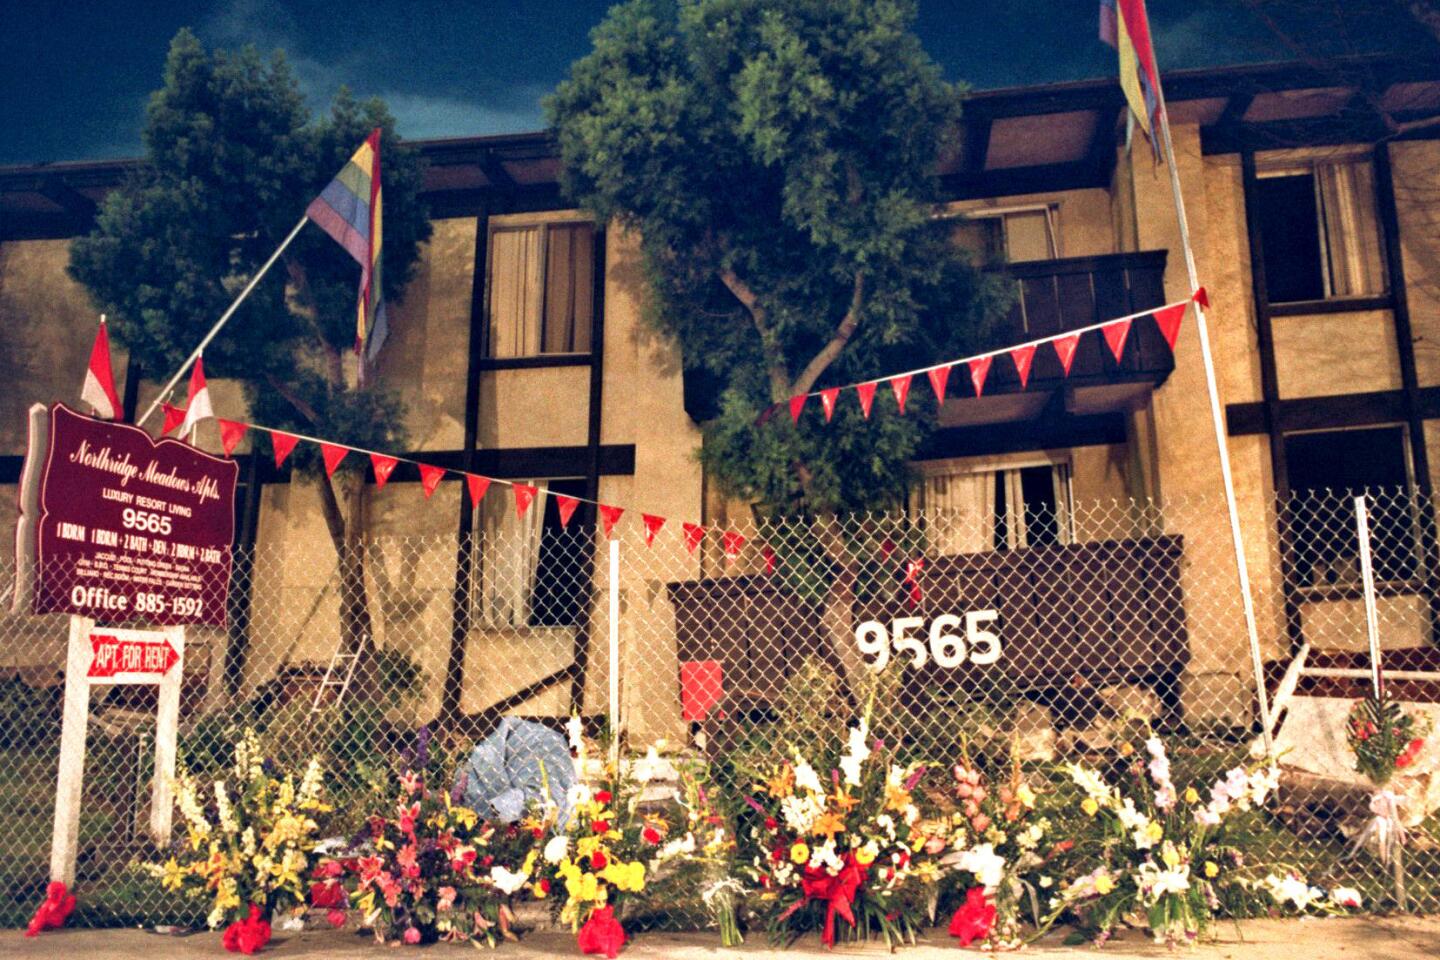 Flowers line a fence at the Northridge Meadows apartment complex a week after the quake.